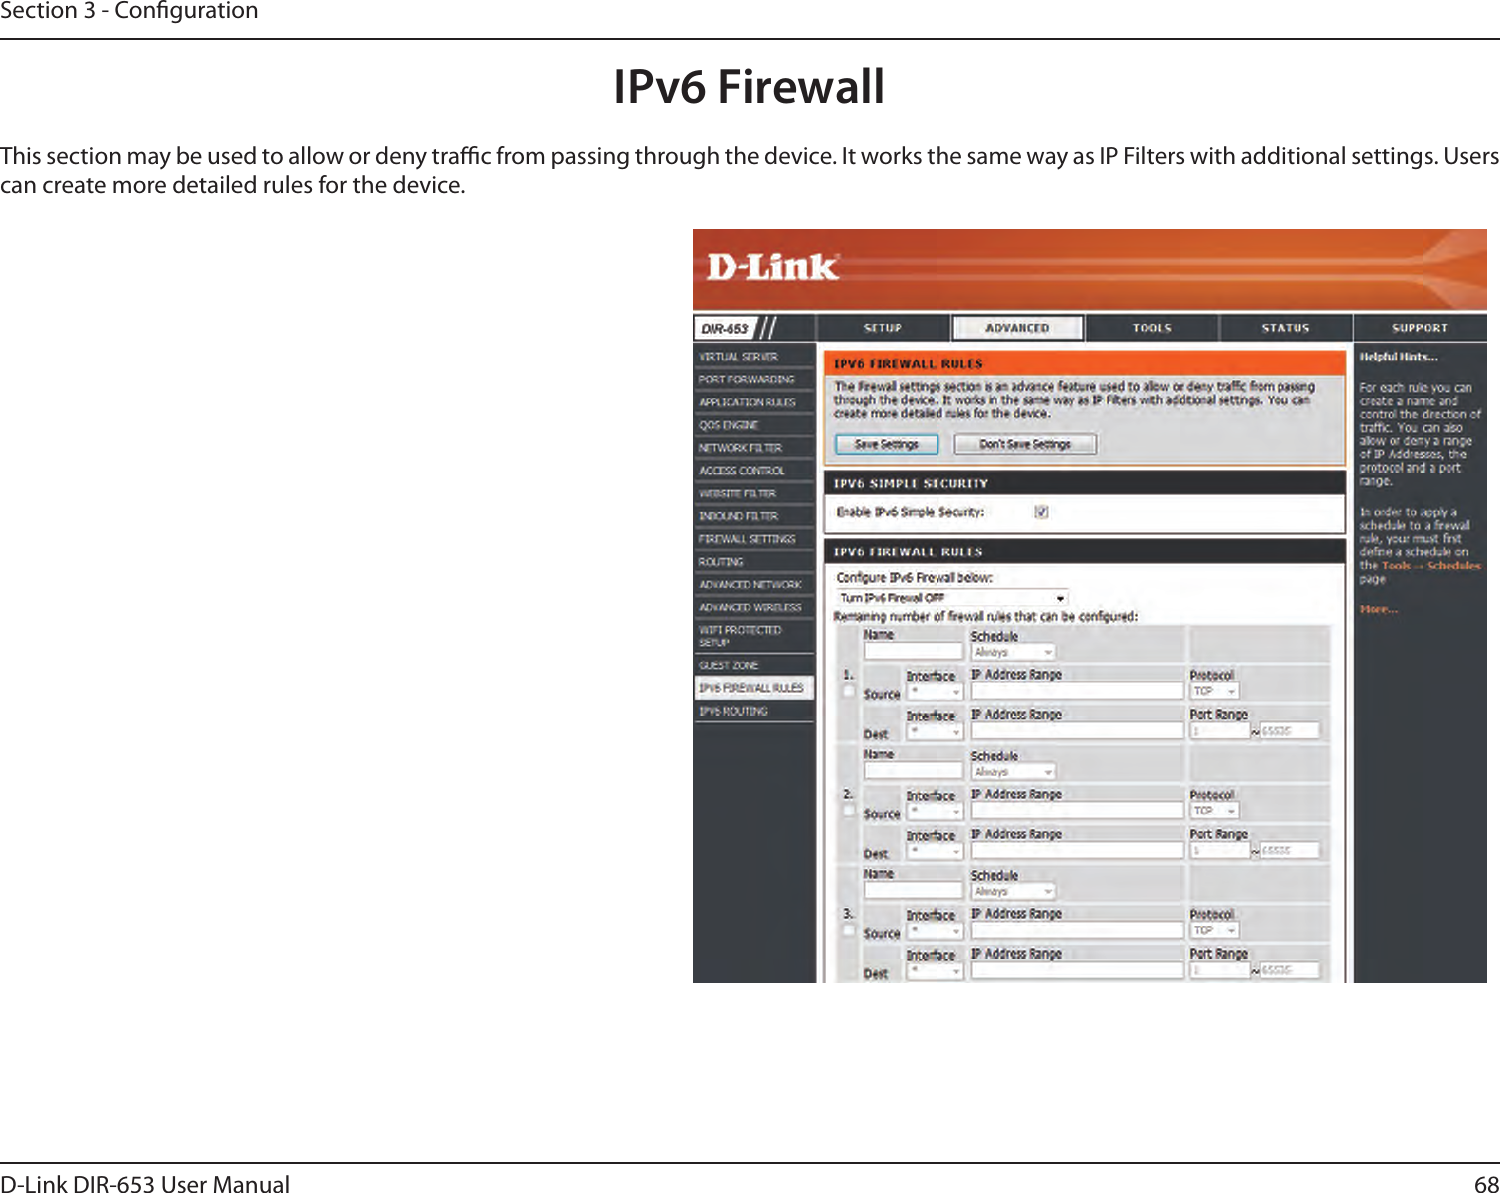 68D-Link DIR-653 User ManualSection 3 - CongurationIPv6 FirewallThis section may be used to allow or deny trac from passing through the device. It works the same way as IP Filters with additional settings. Users can create more detailed rules for the device. 